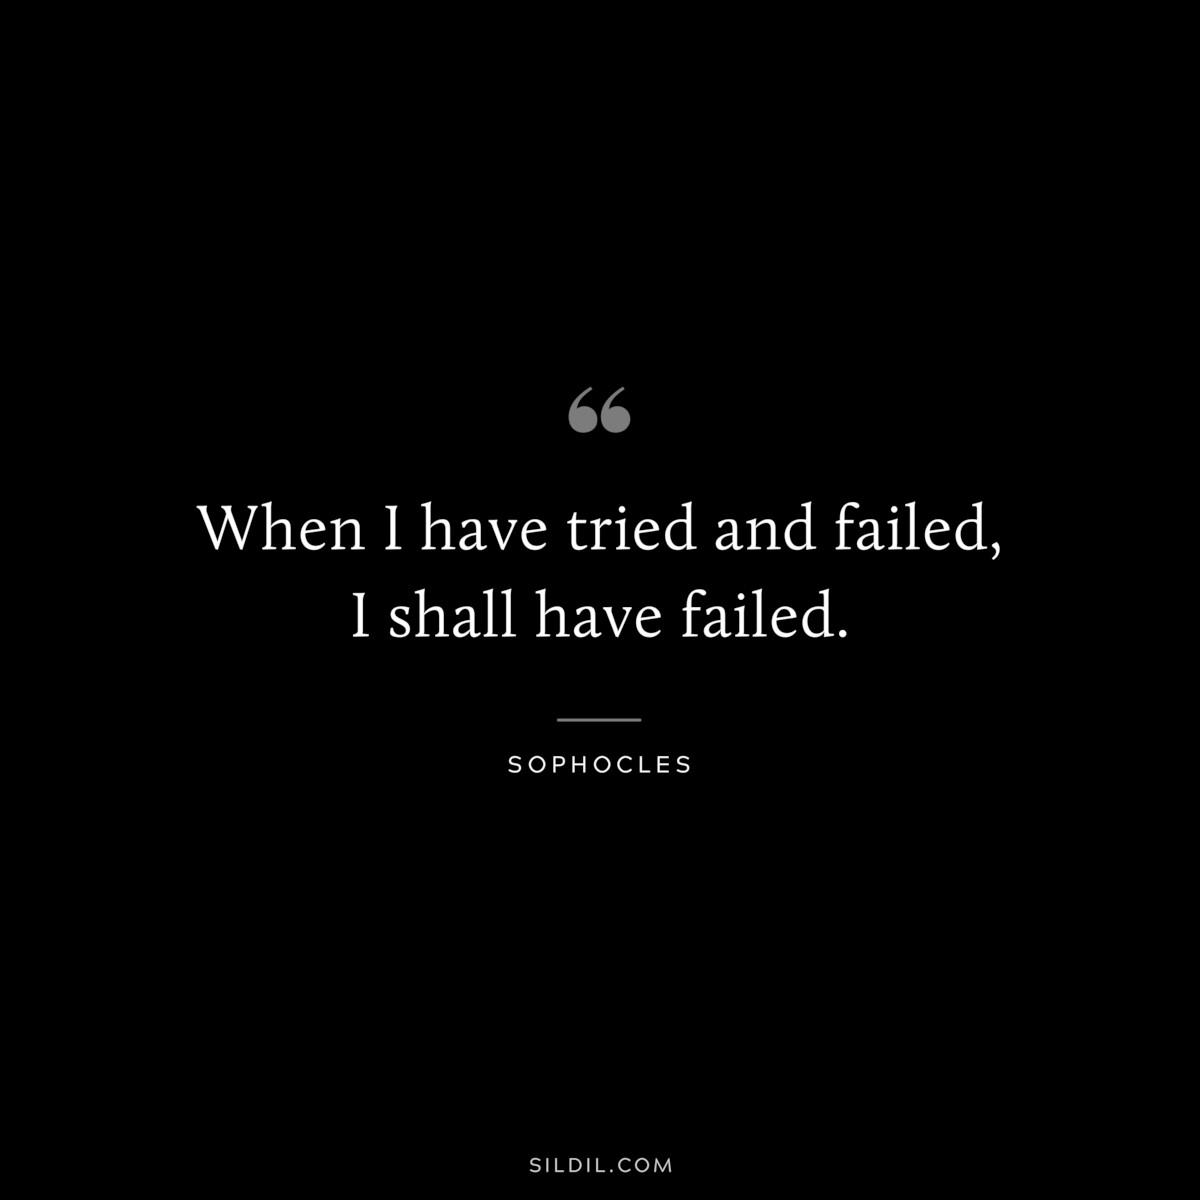 When I have tried and failed, I shall have failed. ― Sophocles